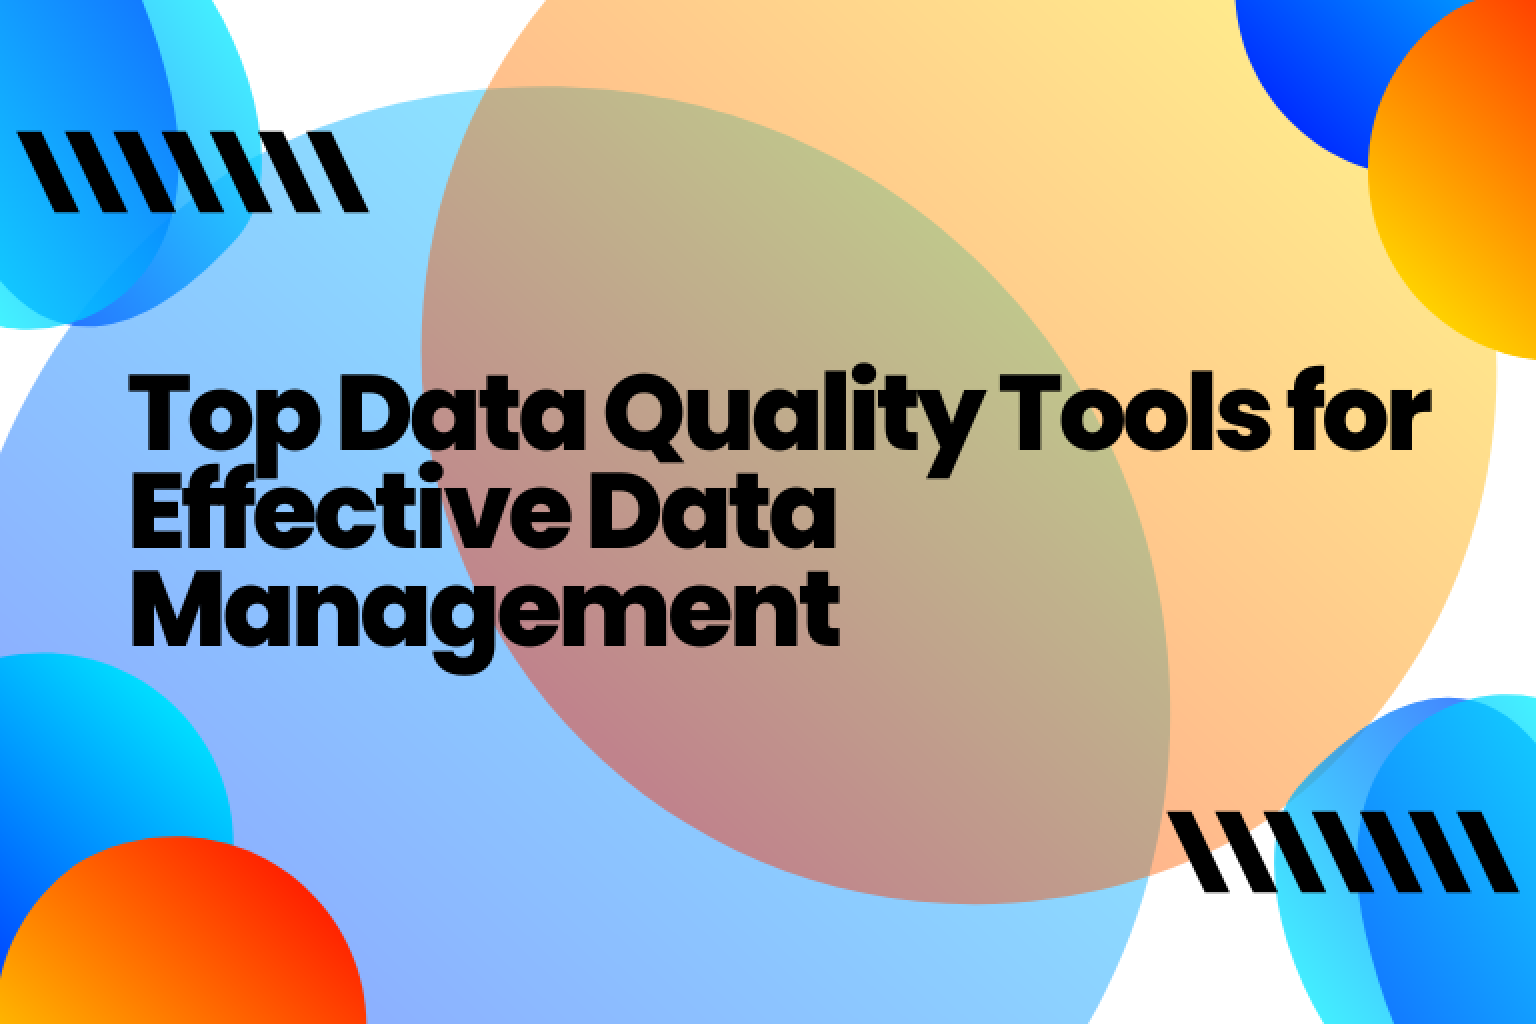 Find the best data quality tools to ensure that your data is accurate, complete, and consistent, and make more informed decisions.